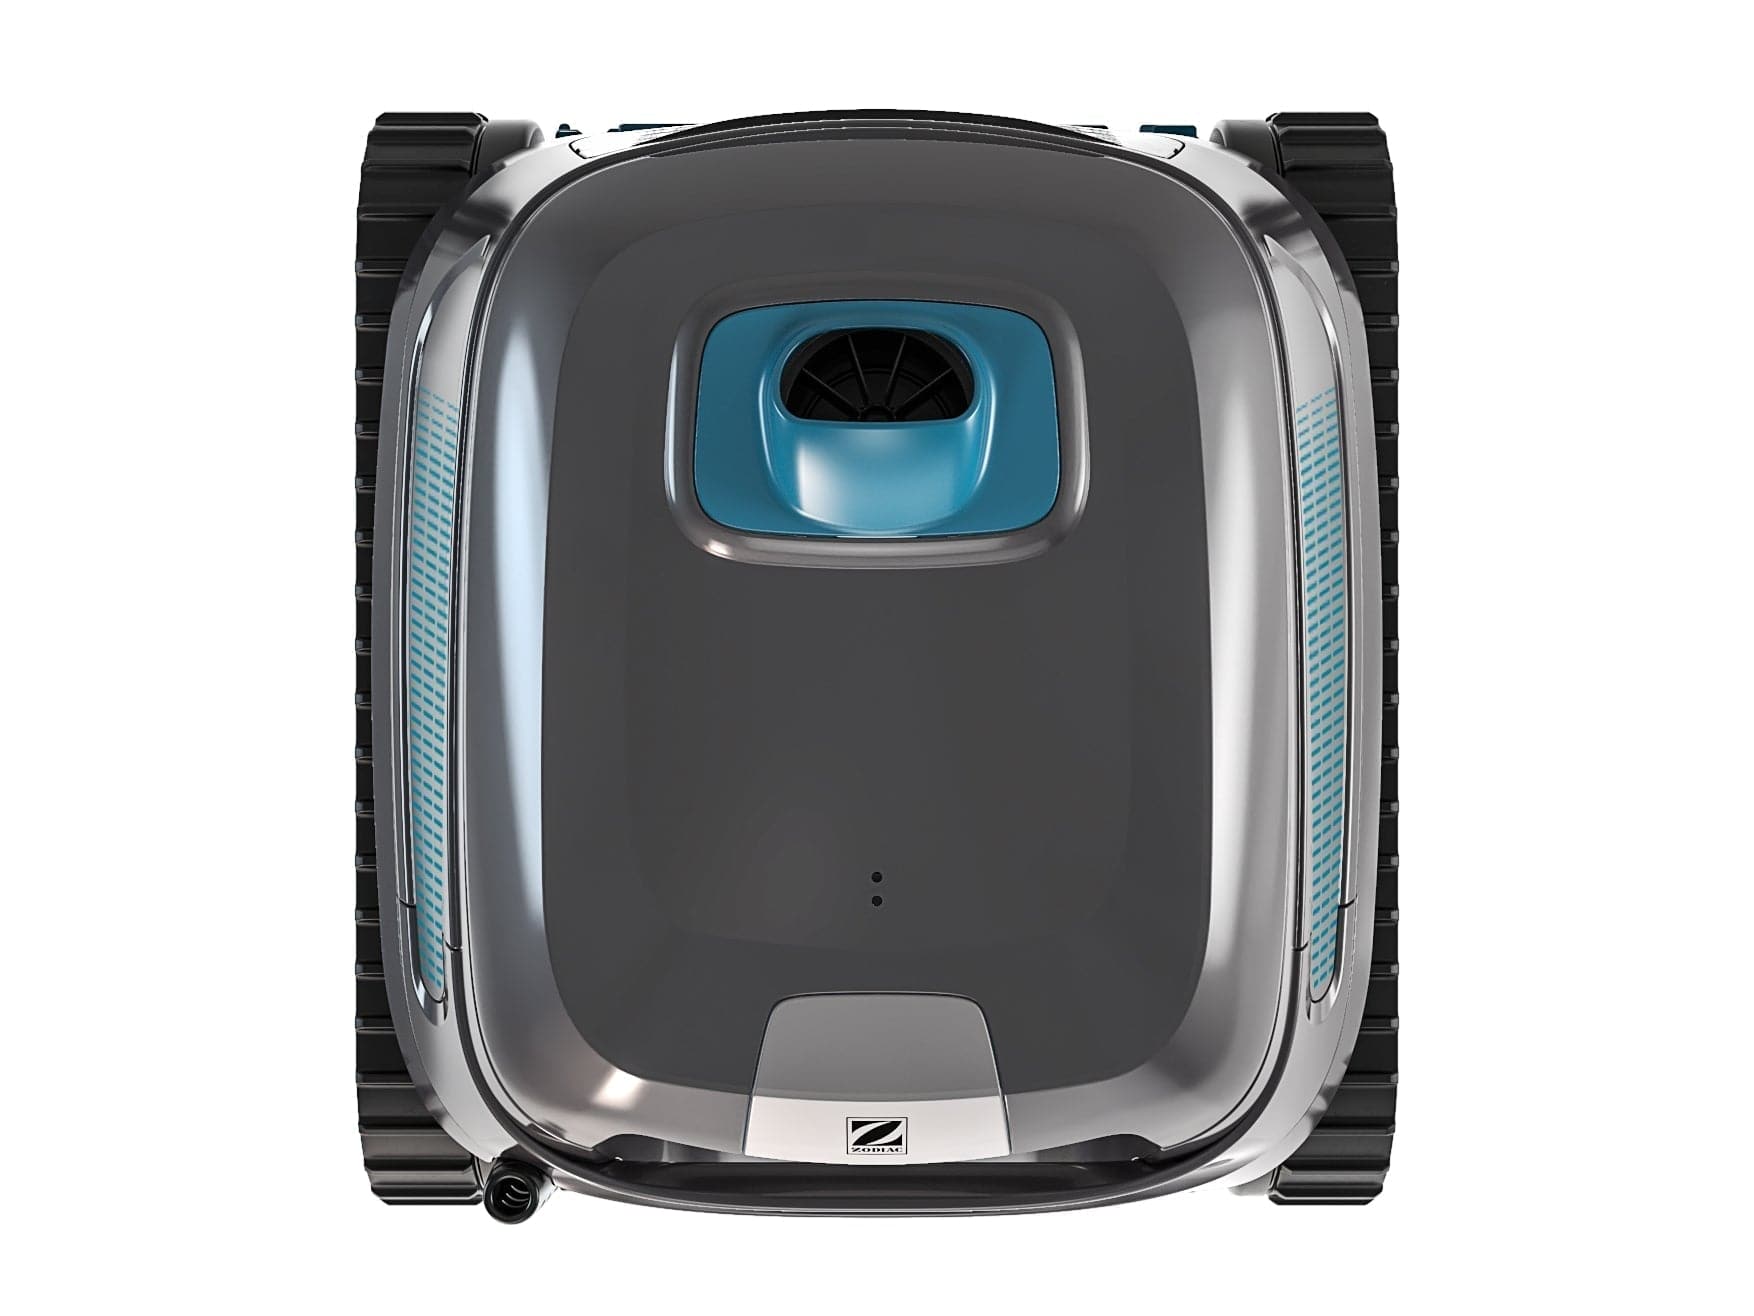 ODIAC CNX1090 ZELECTRIC ROBOT FOR POOLS UP TO 9X4M